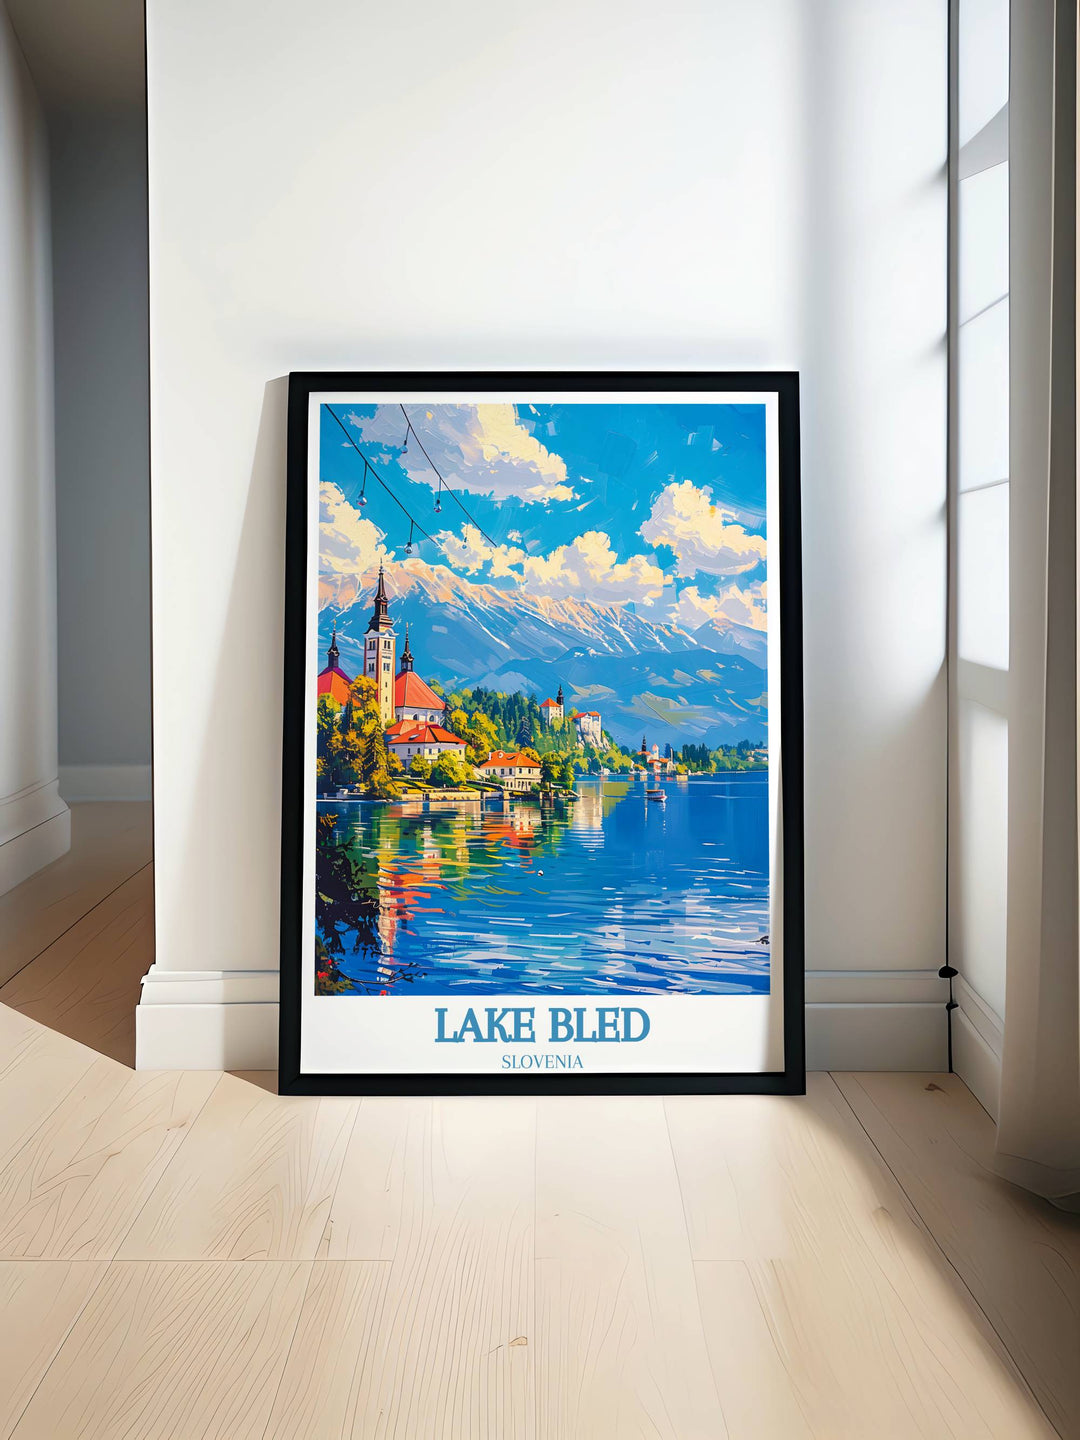 Vivid depiction of Lake Bleds emerald waters and distant Alps in a travel print perfect for nature enthusiasts looking to capture the essence of Slovenia's stunning landscapes in their home or office decor